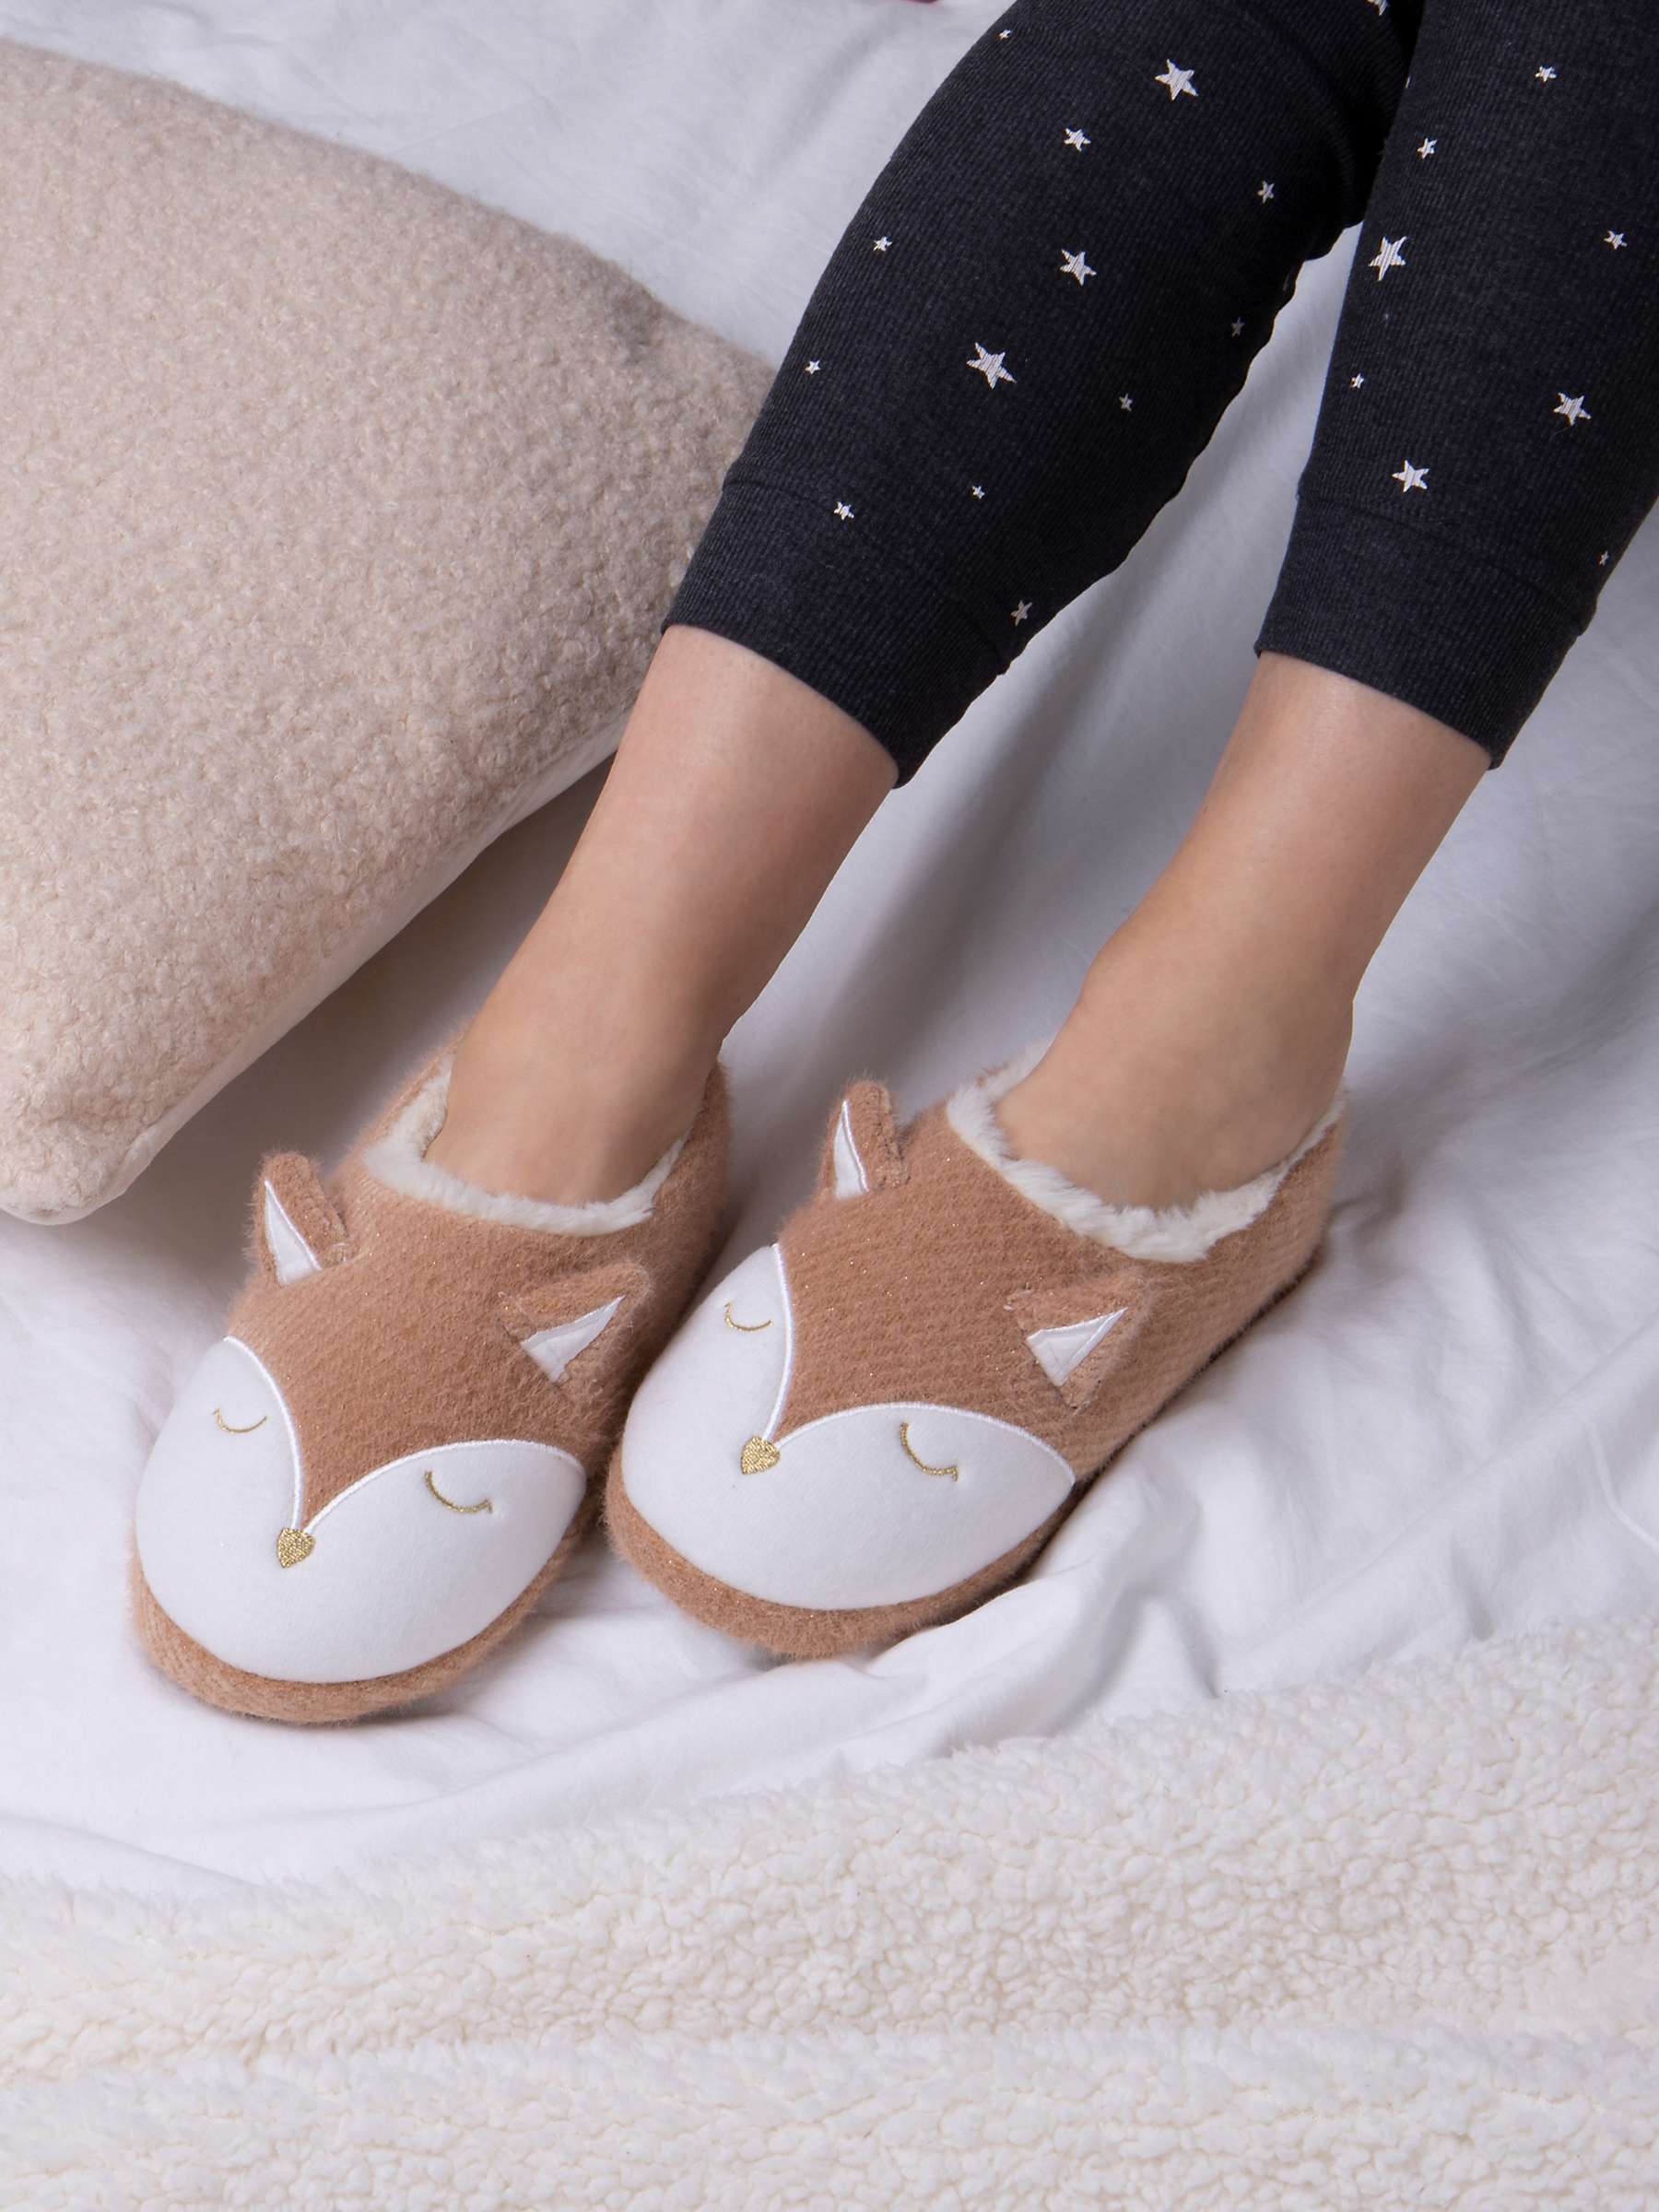 Buy totes Fox Novelty Slippers, Brown Online at johnlewis.com